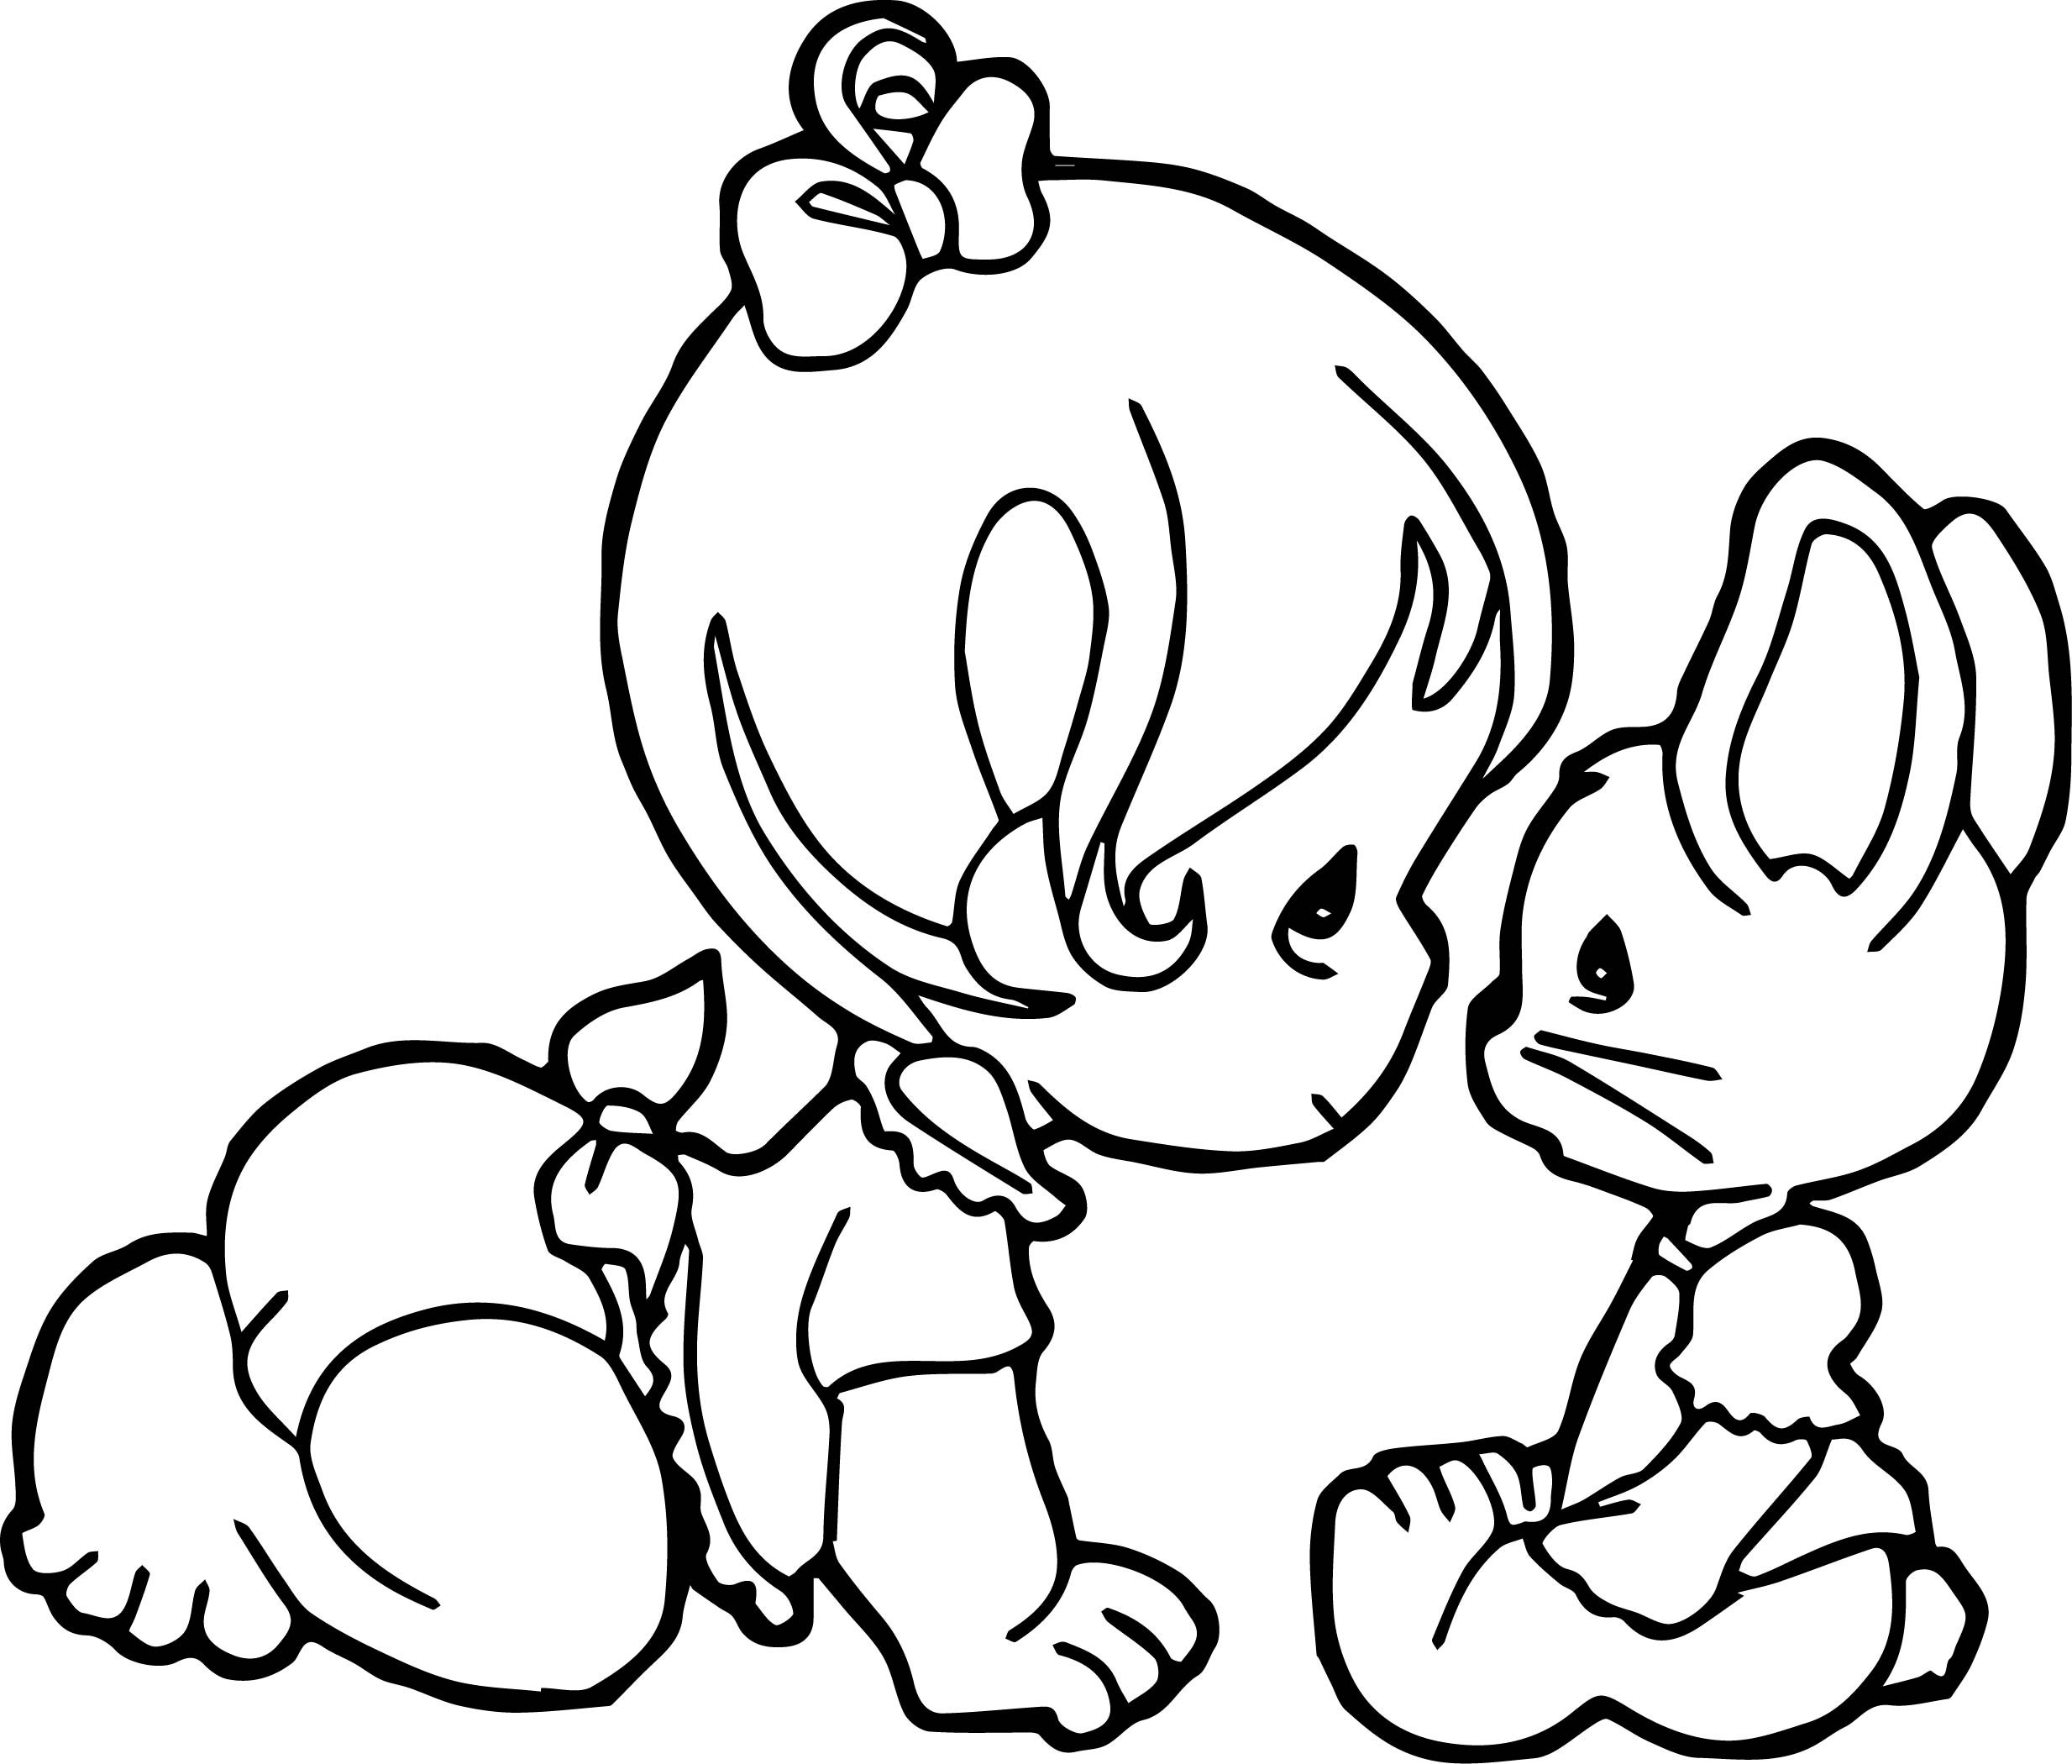 Baby Girl Coloring Page
 Baby Girl Cartoon And Bunny Coloring Page